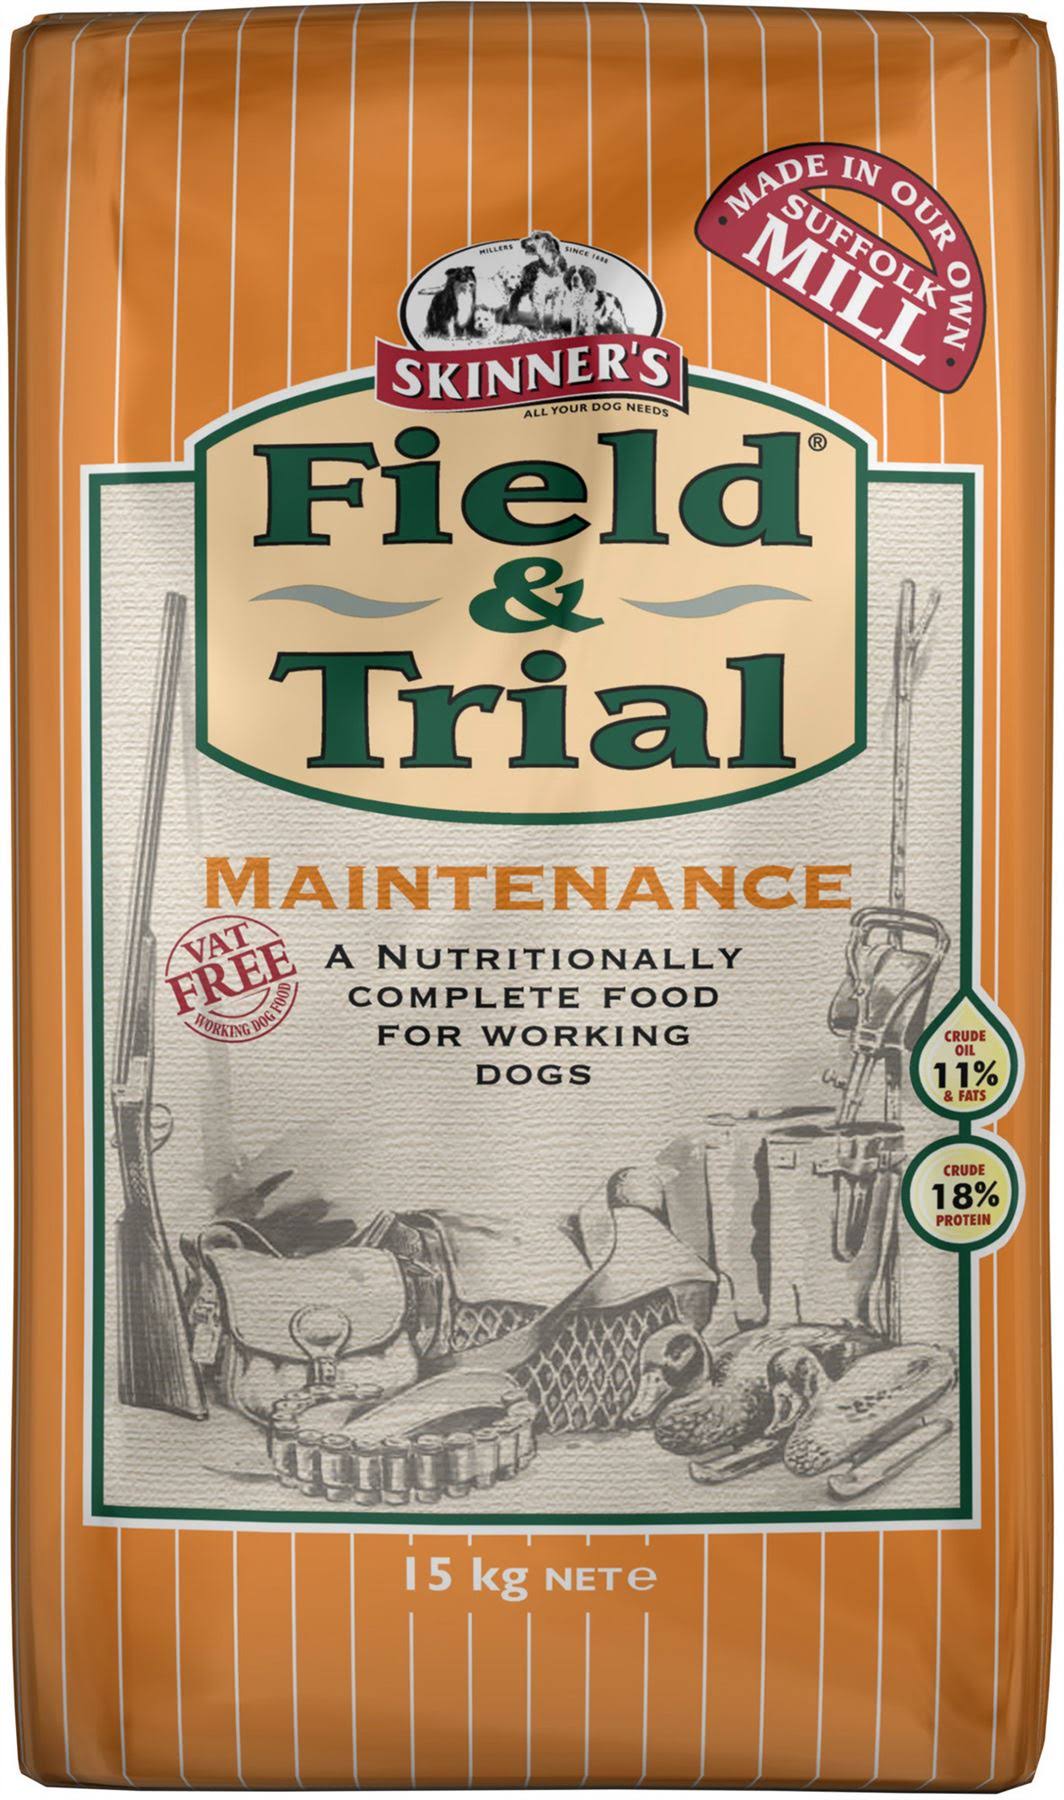 Skinners Field and Trial Maintenance Dry Mix